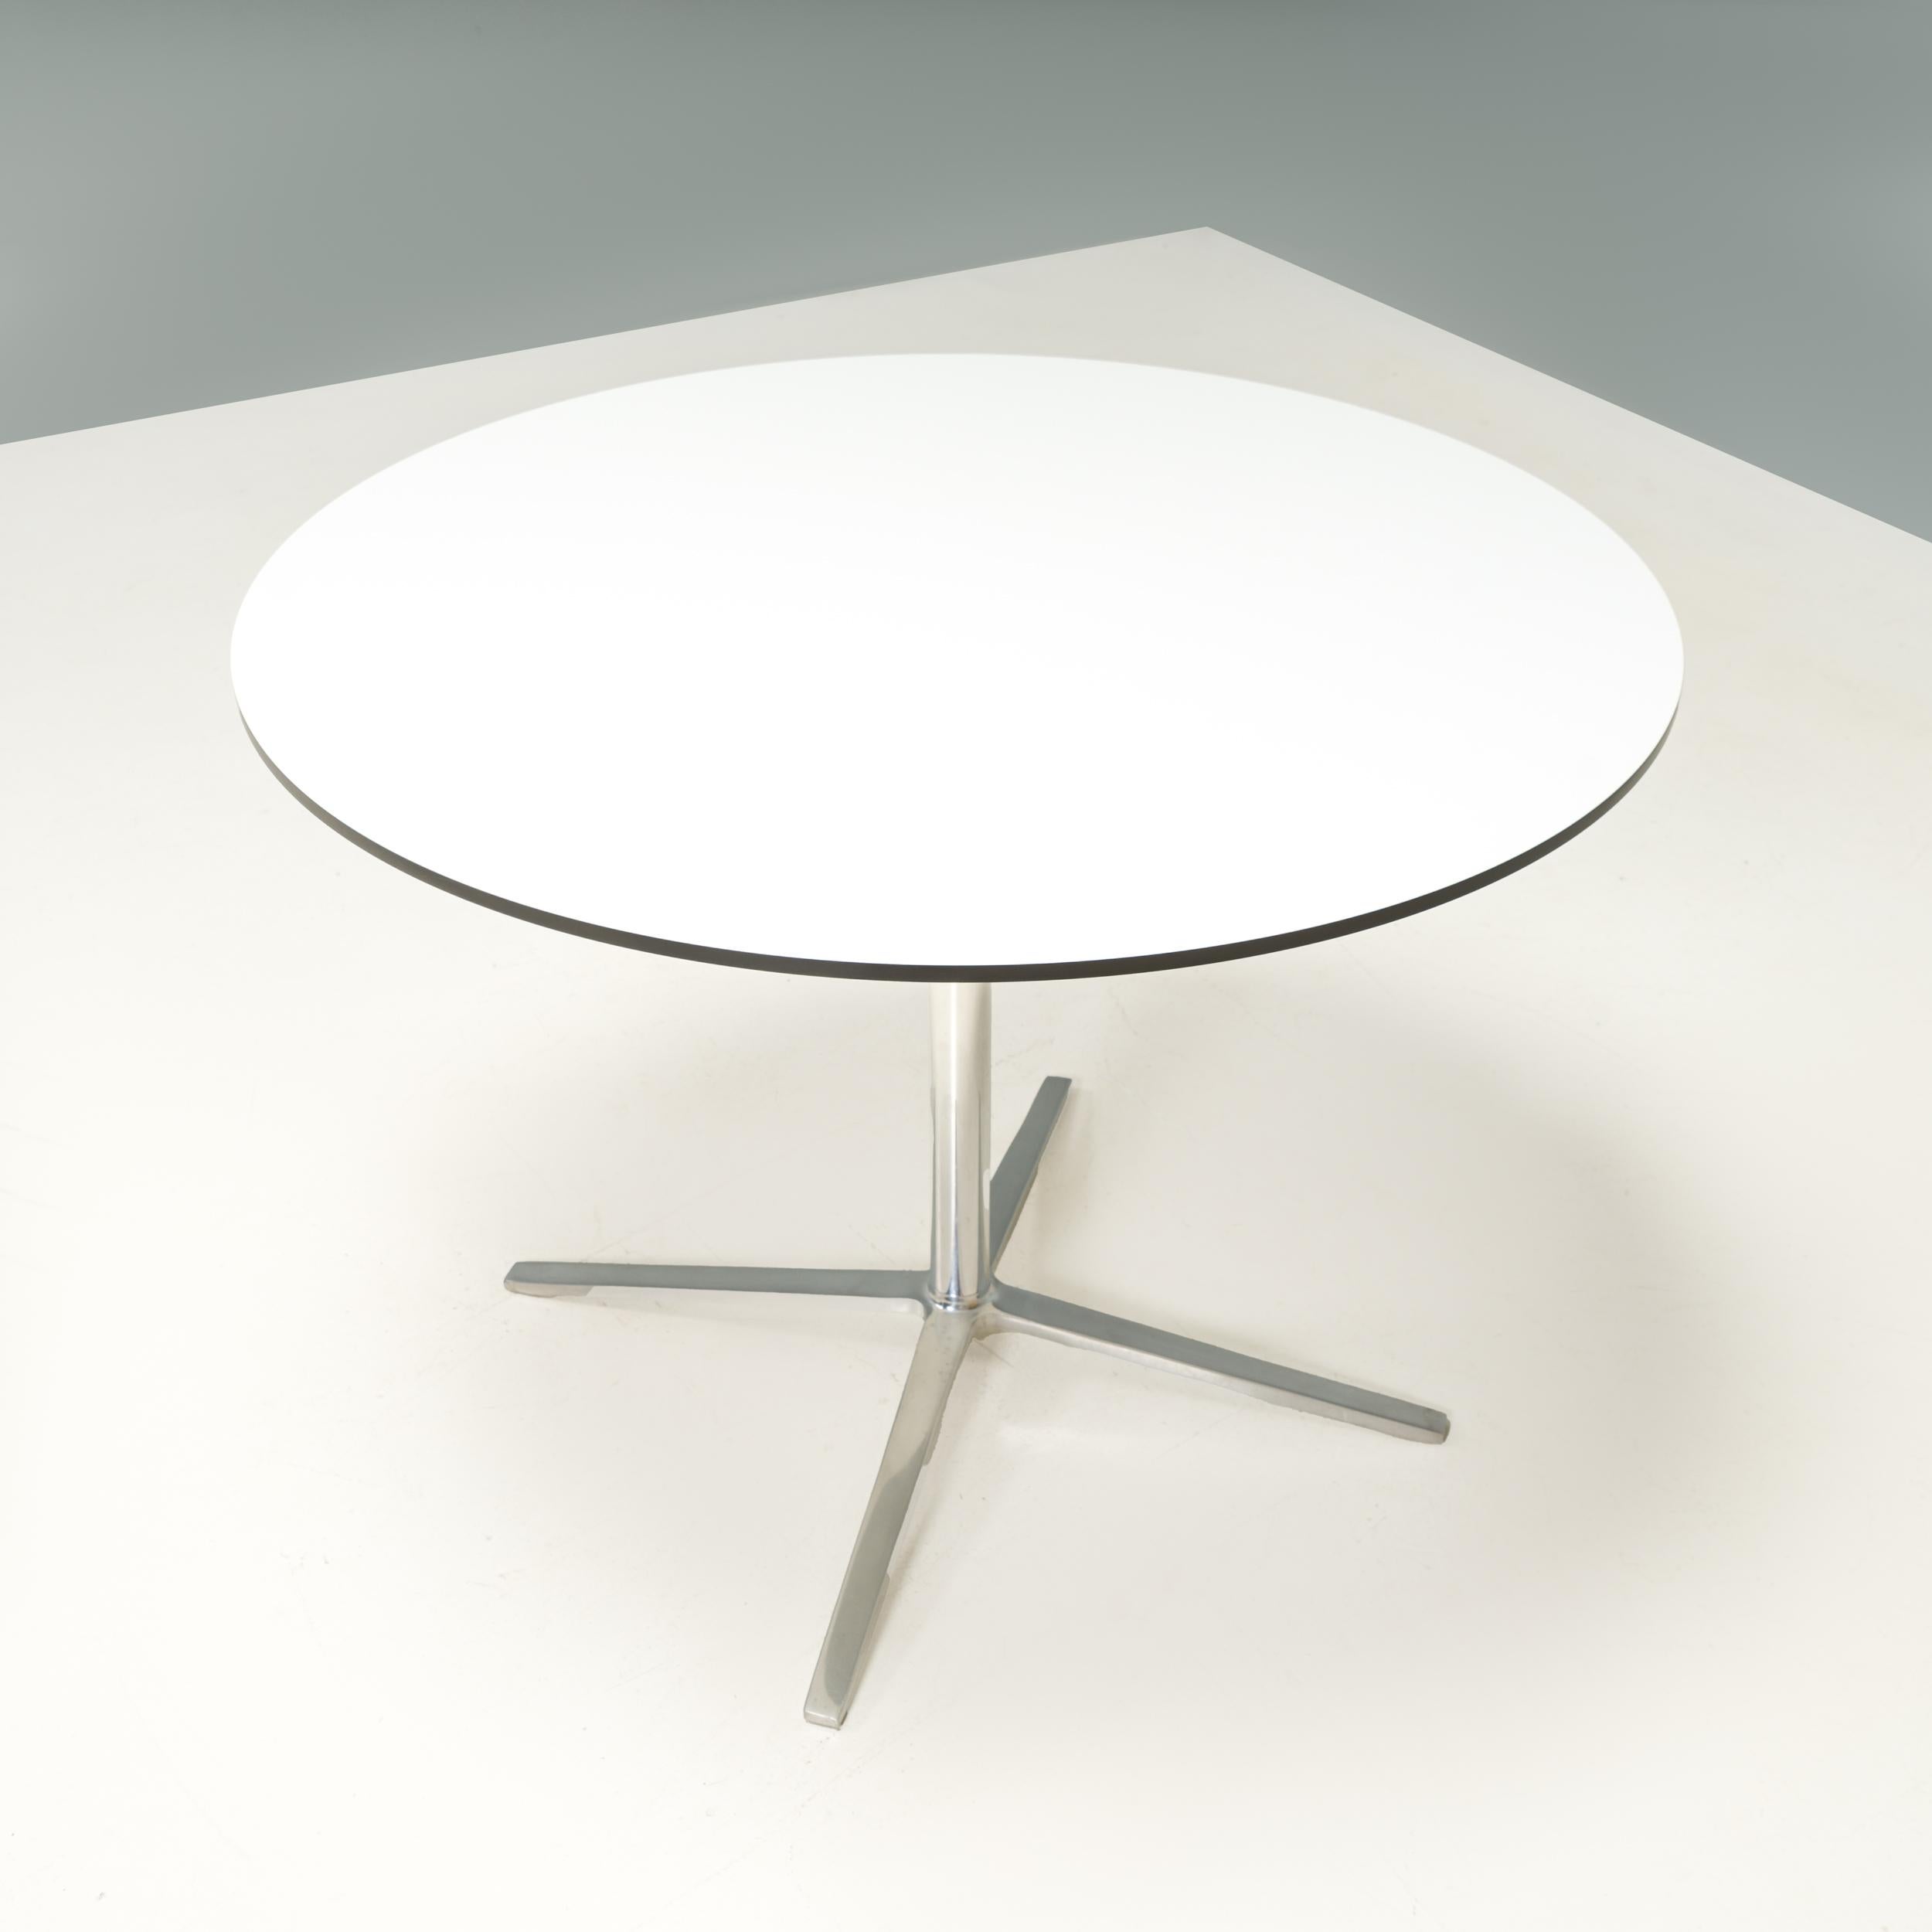 Originally designed by Jeffrey Bernett in 2006, the Cosmos table range is manufactured by B&B Italia and is a fantastic example of minimalist design

Simple yet elegant, this Cosmos dining table was made in 2007 and features a sleek four star base